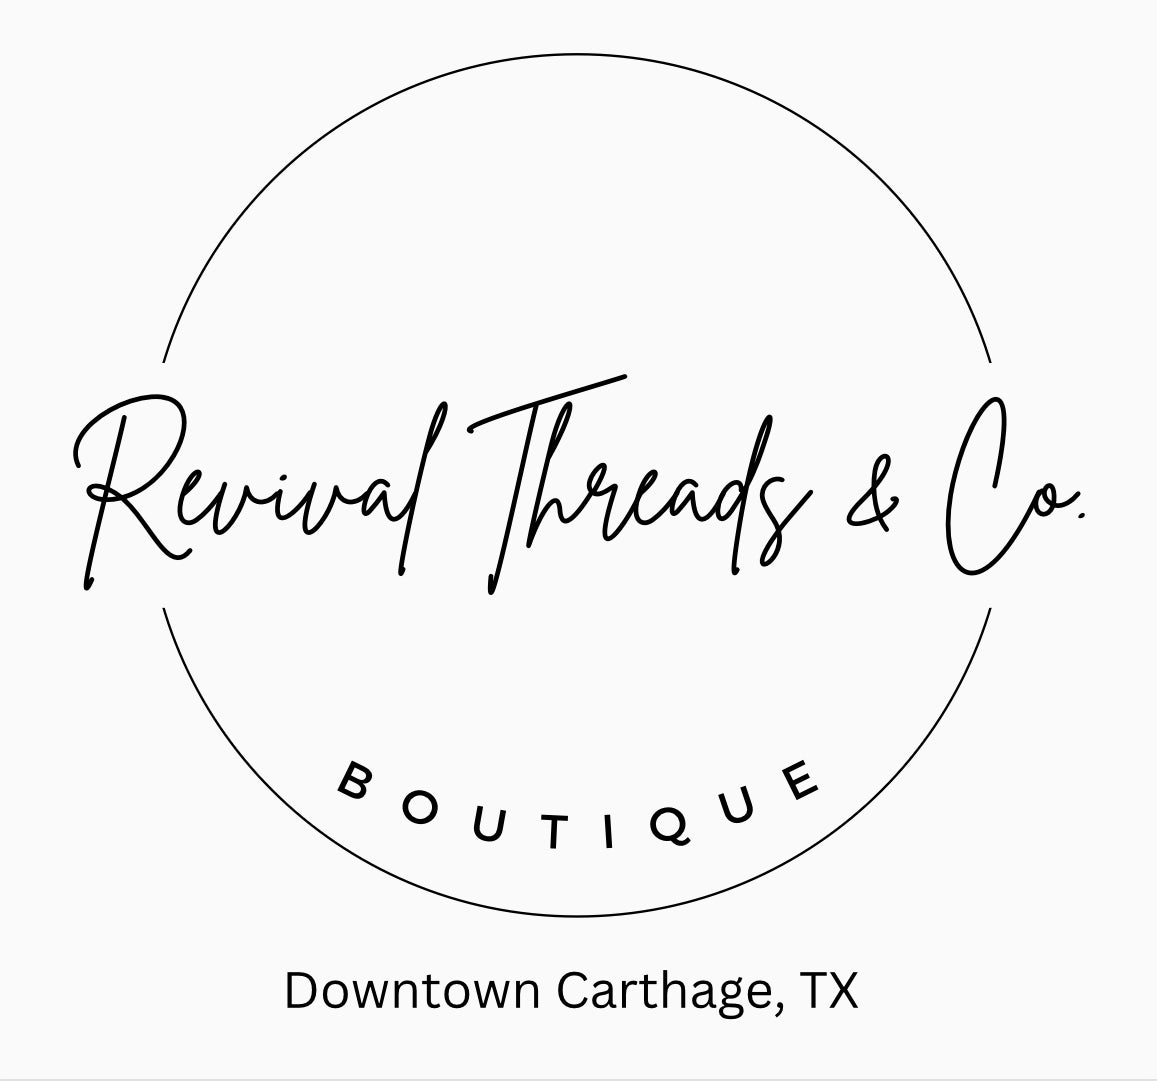 Revival Threads & Co